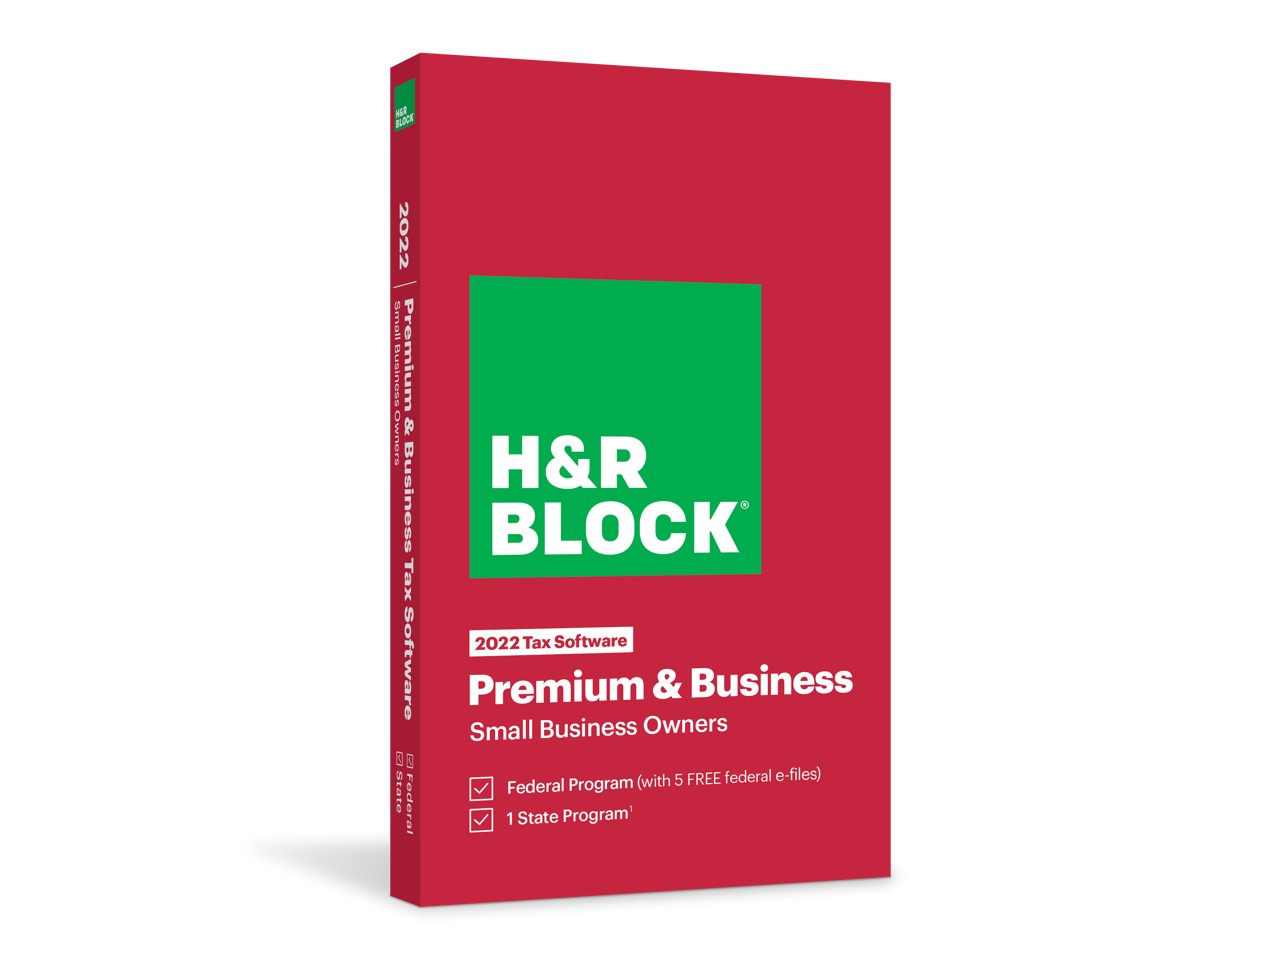 H&R Block Tax Software Premium & Business 2022 Windows Only [Key Card